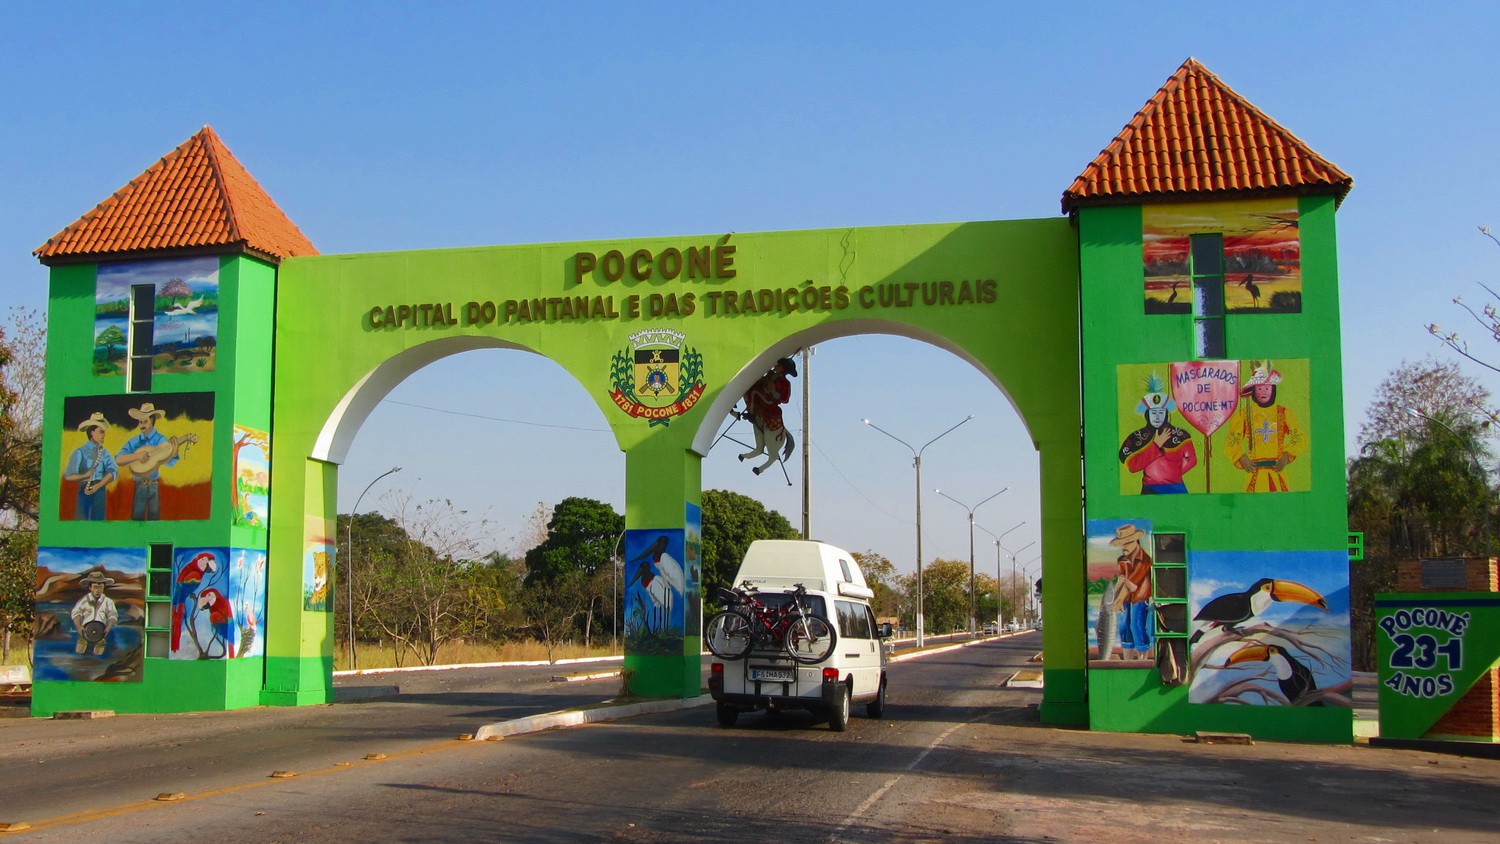 Pocone, the gateway to the inner Pantanal